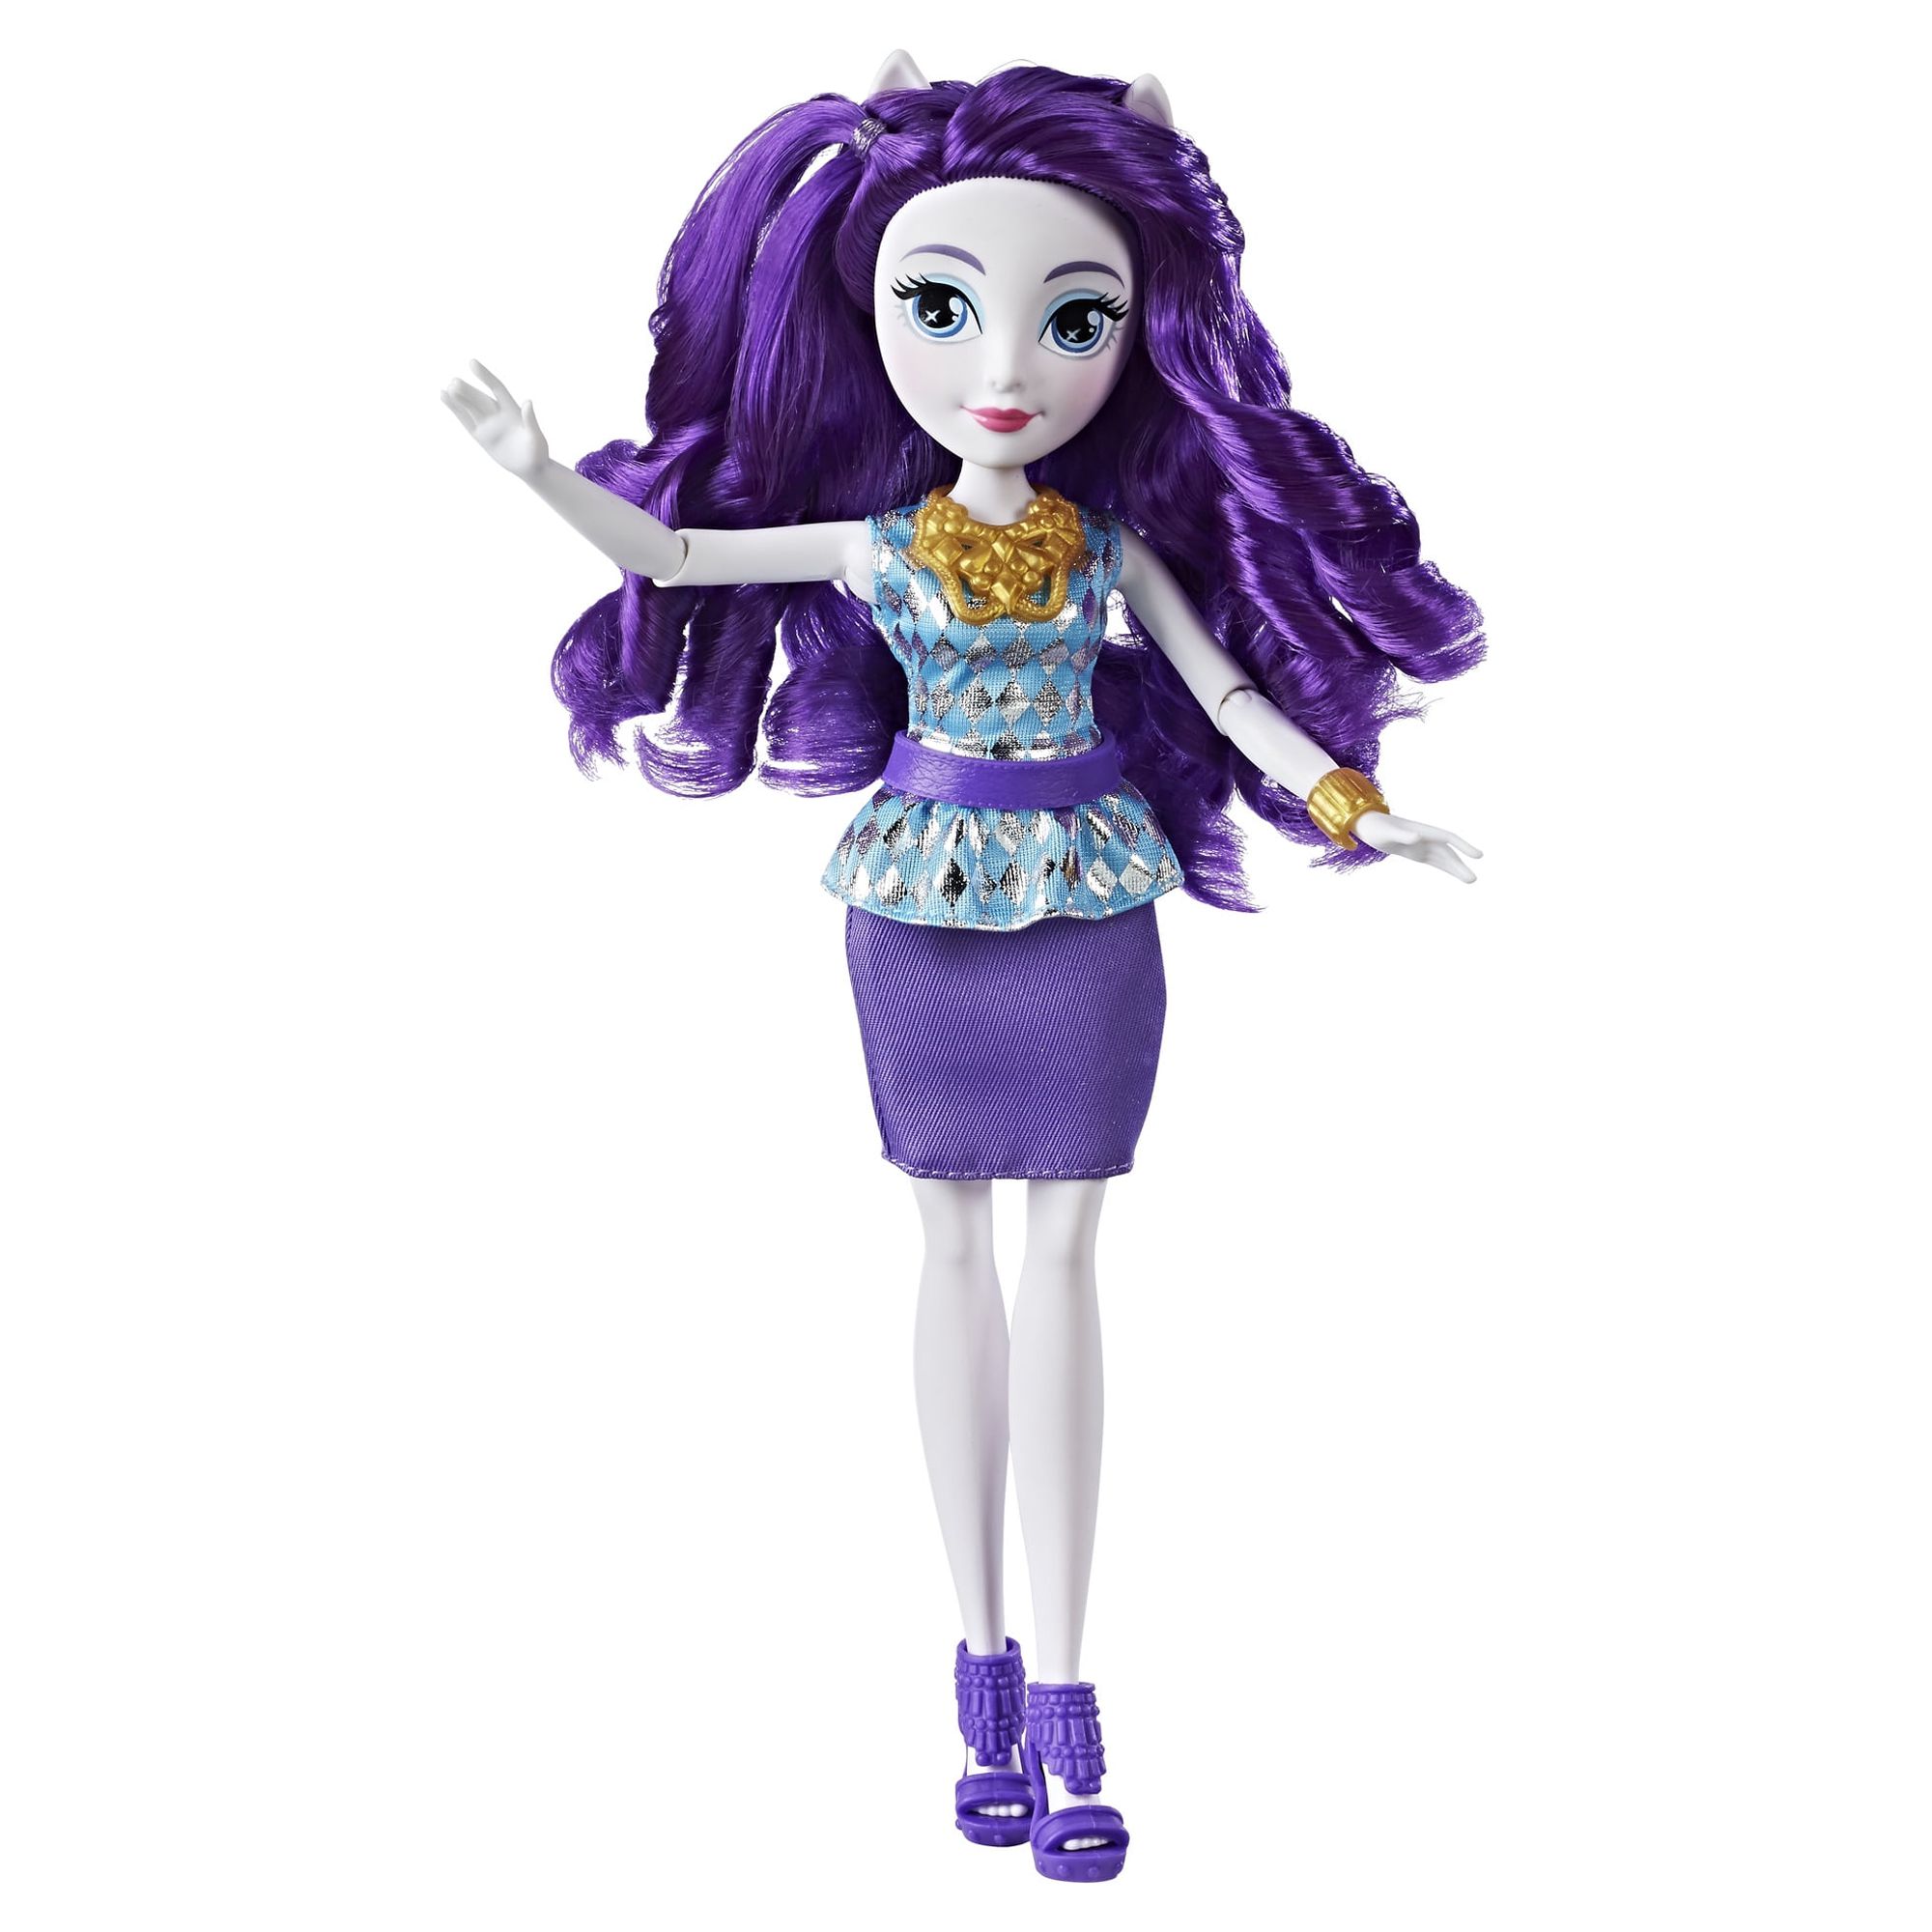 My Little Pony Equestria Girls Rarity Classic Style Doll - image 1 of 9